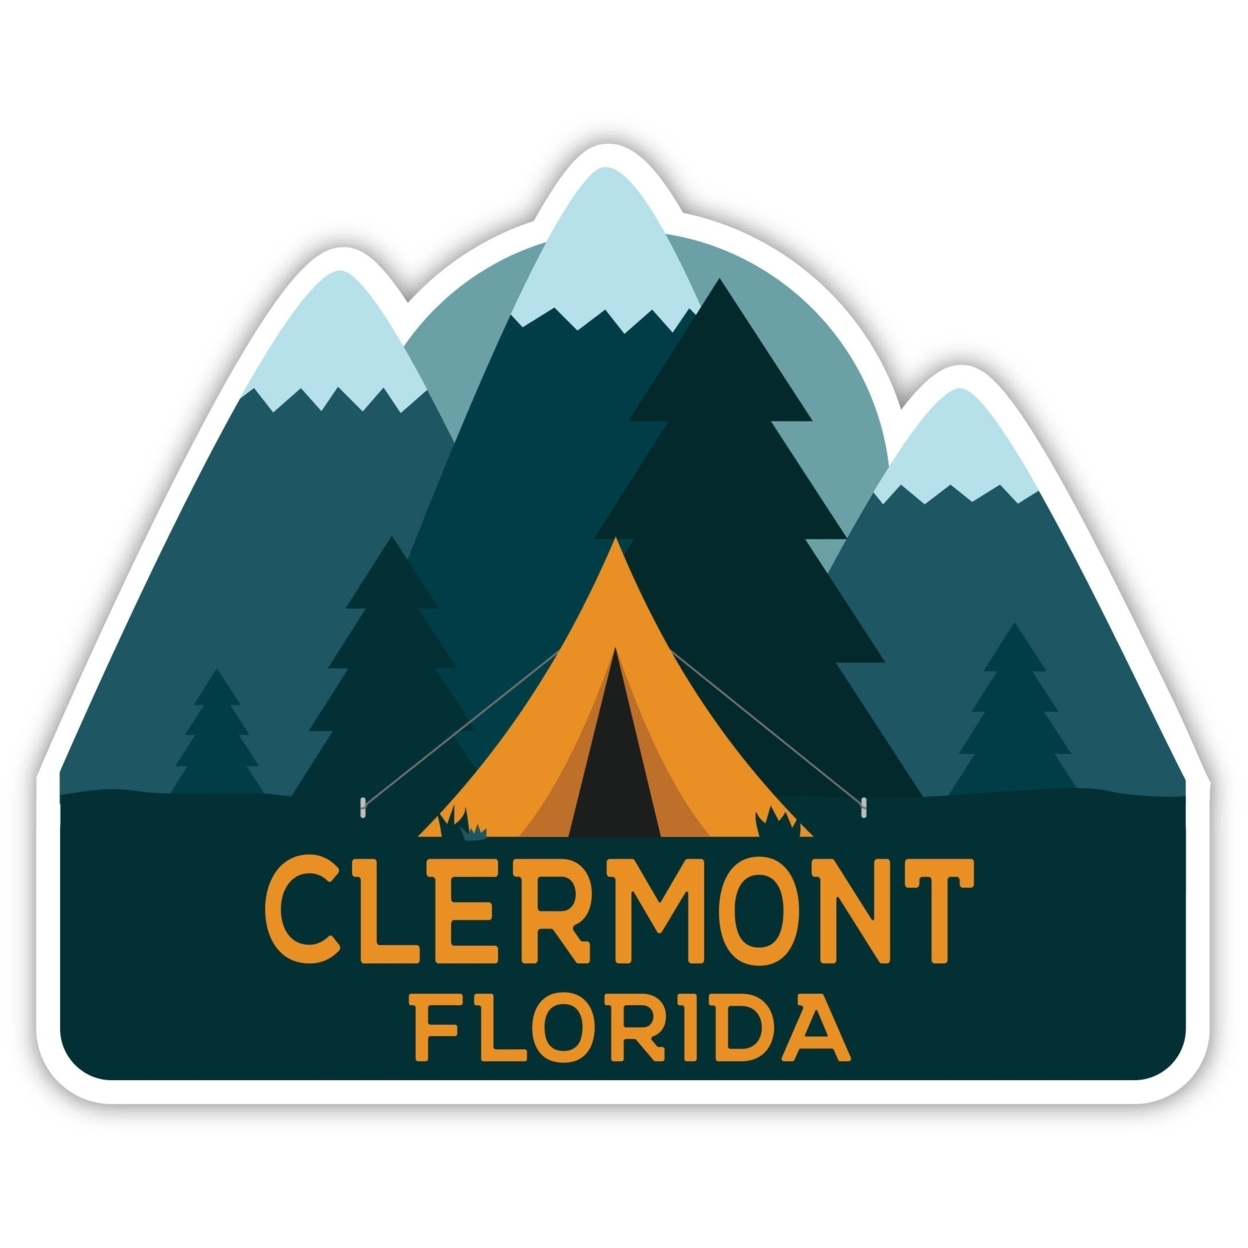 Clermont Florida Souvenir Decorative Stickers (Choose Theme And Size) - 4-Pack, 4-Inch, Tent